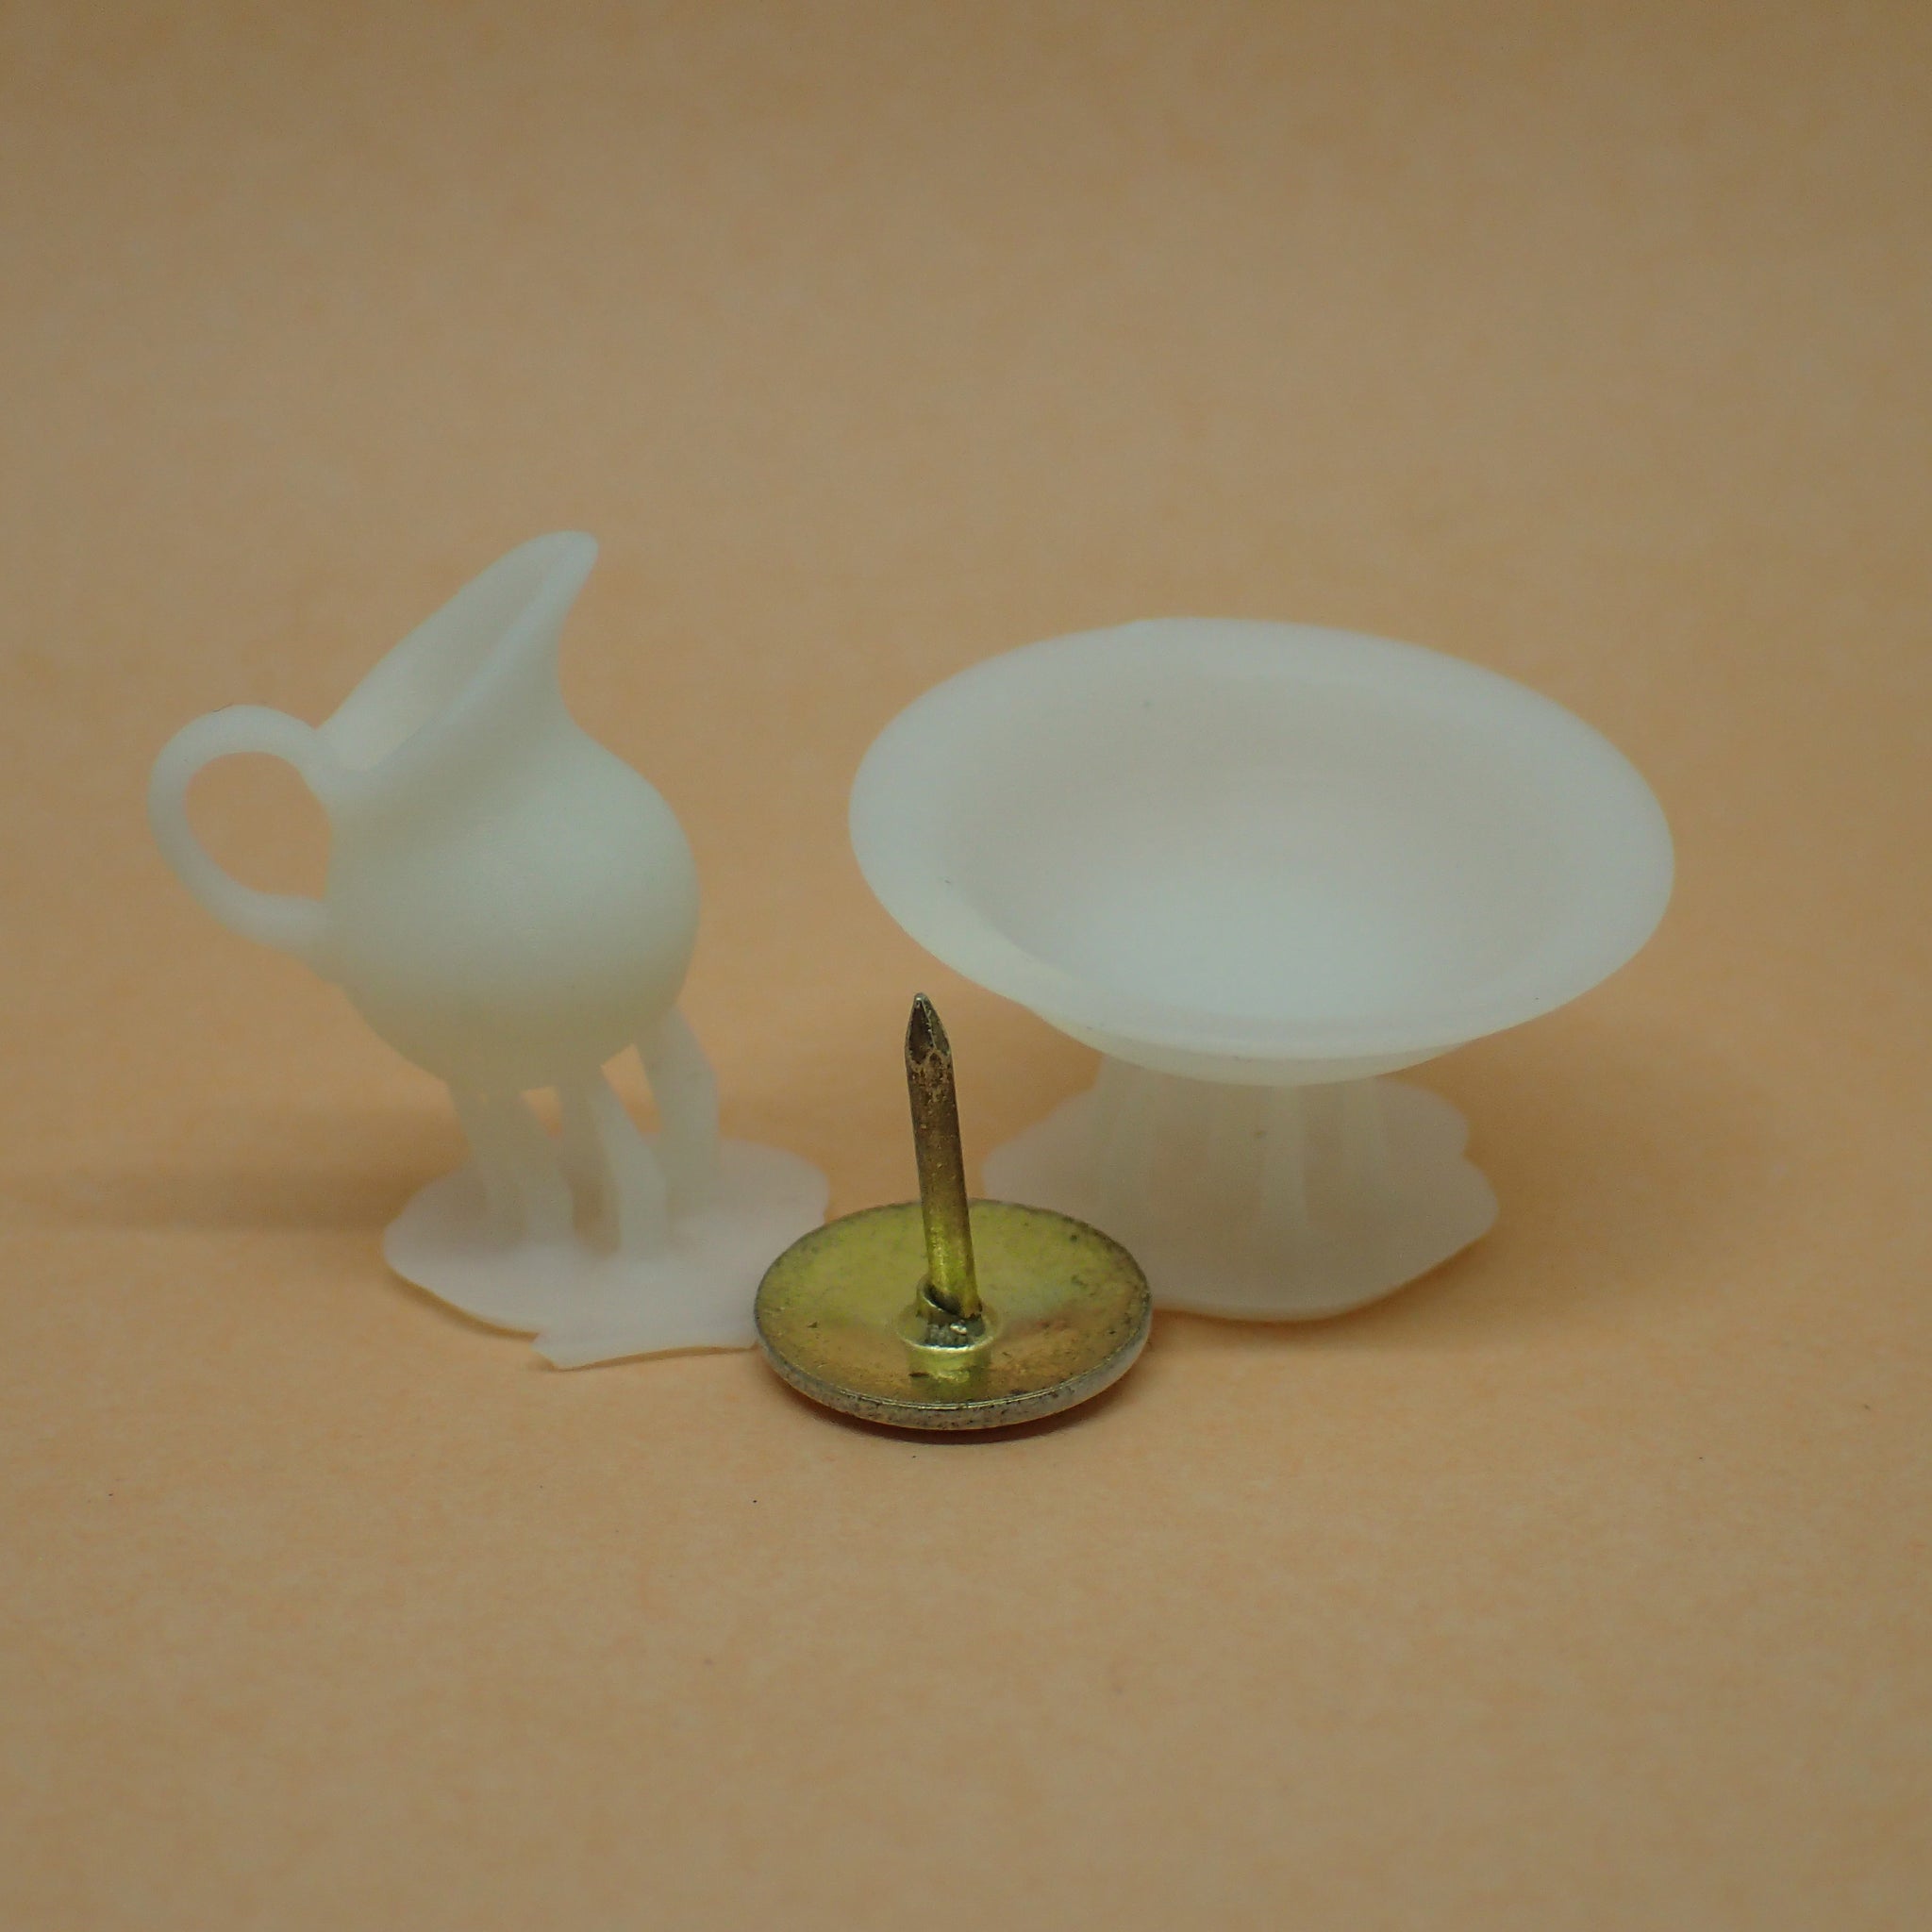 Ewer and basin set, 1/24th scale